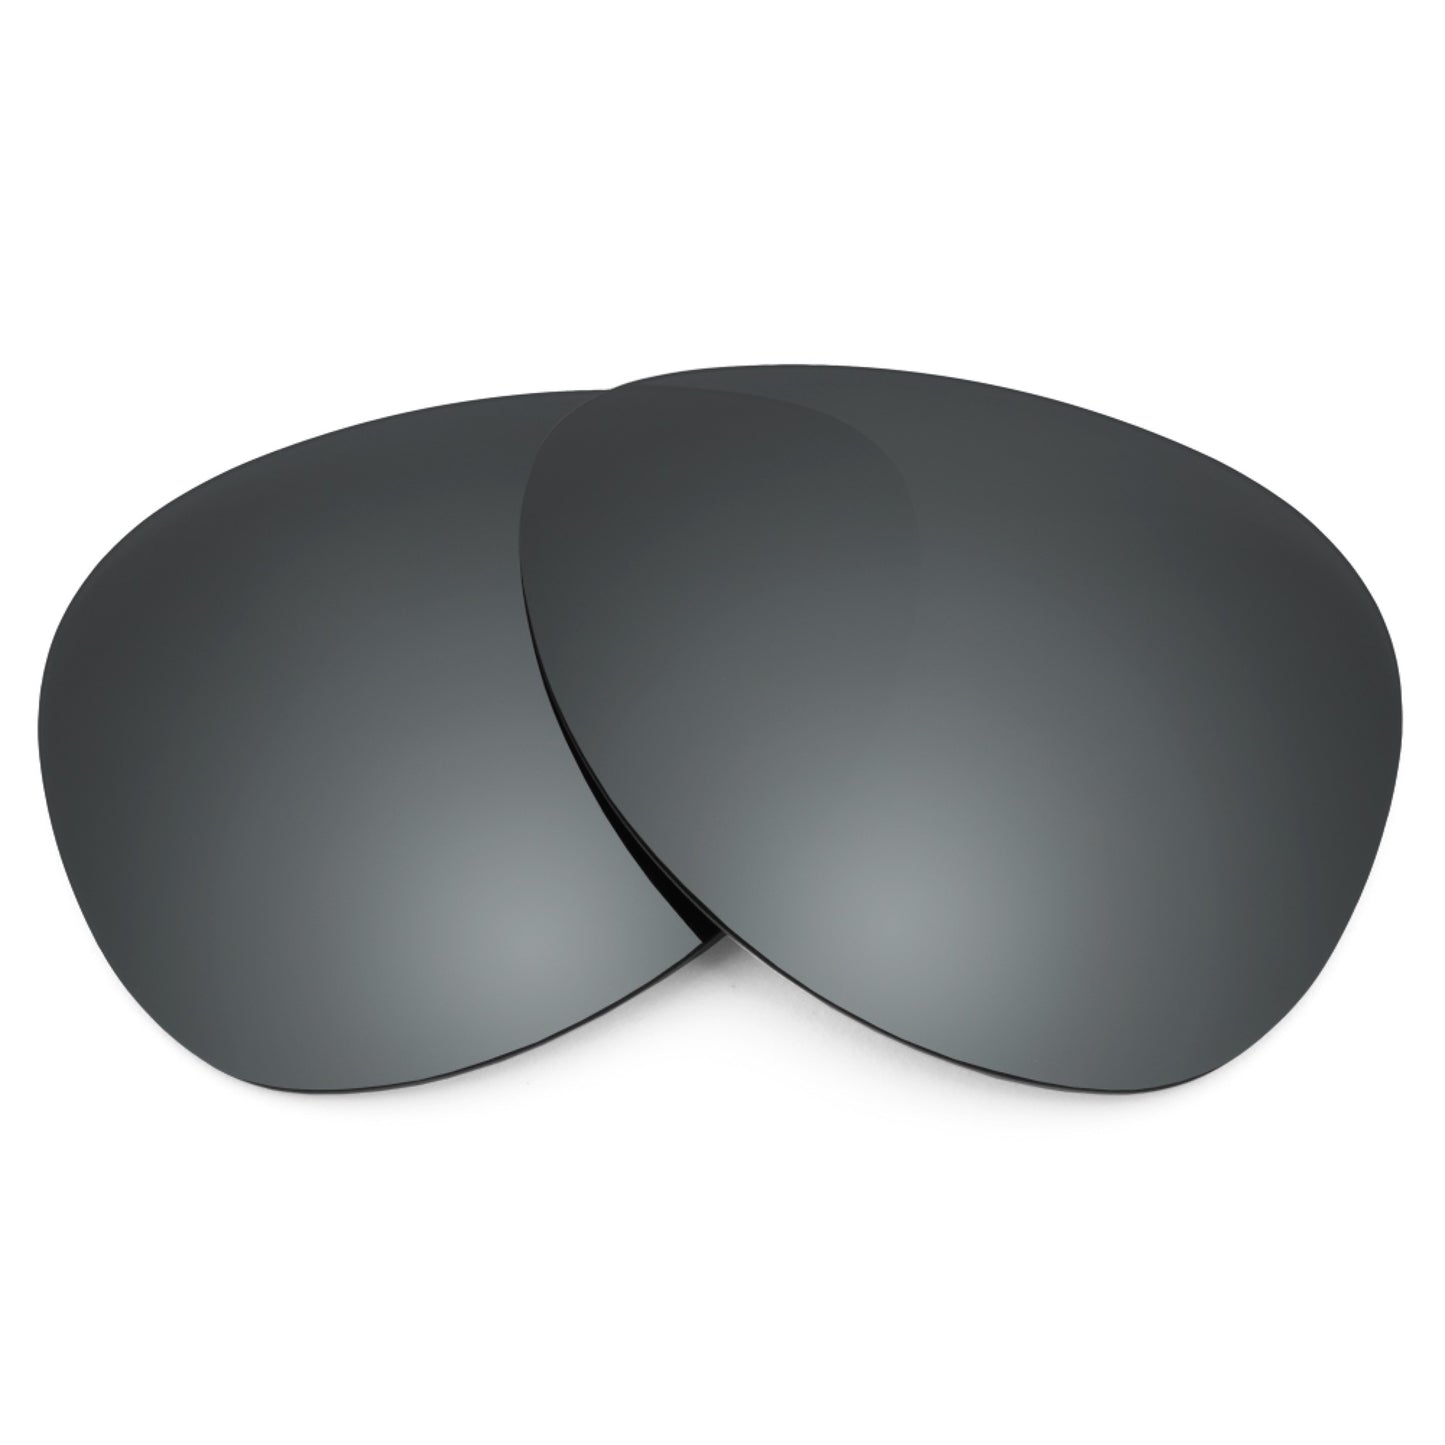 Revant replacement lenses for Ray-Ban Aviator Large Metal II RB3026 62mm Non-Polarized Black Chrome